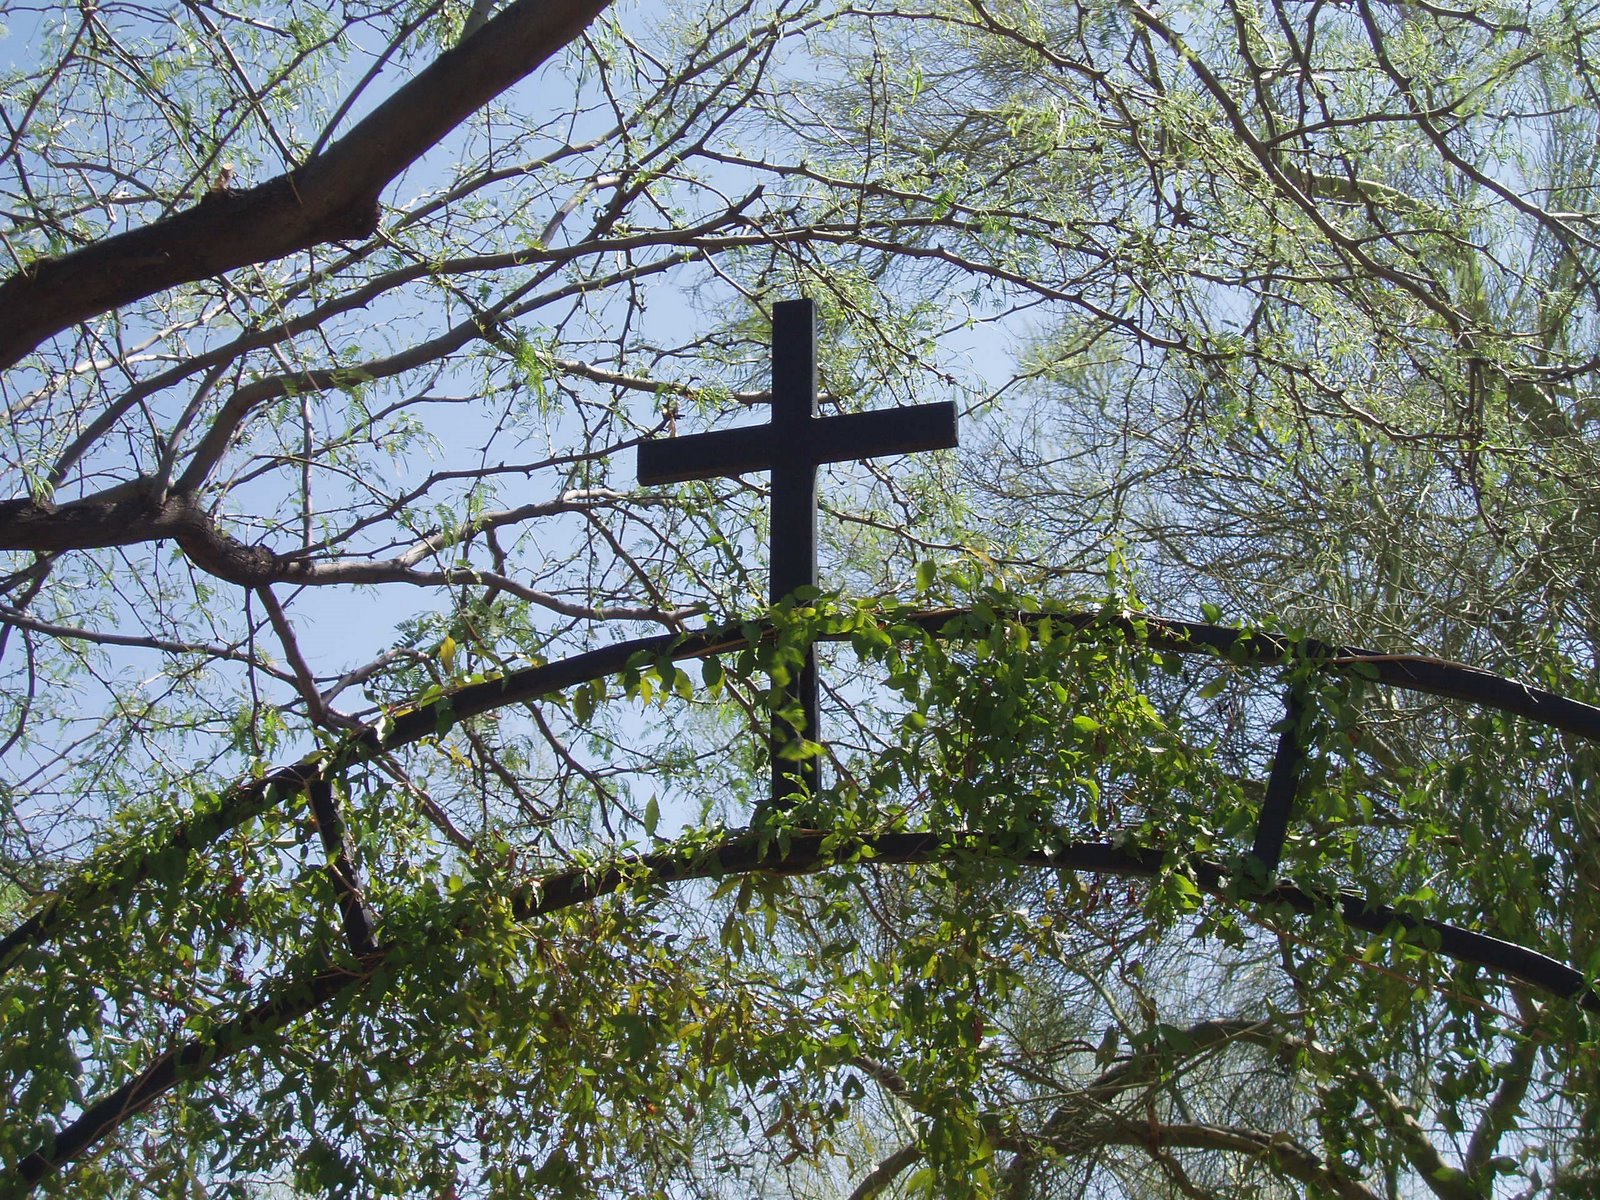 [cross+against+sky+with+branches.JPG]